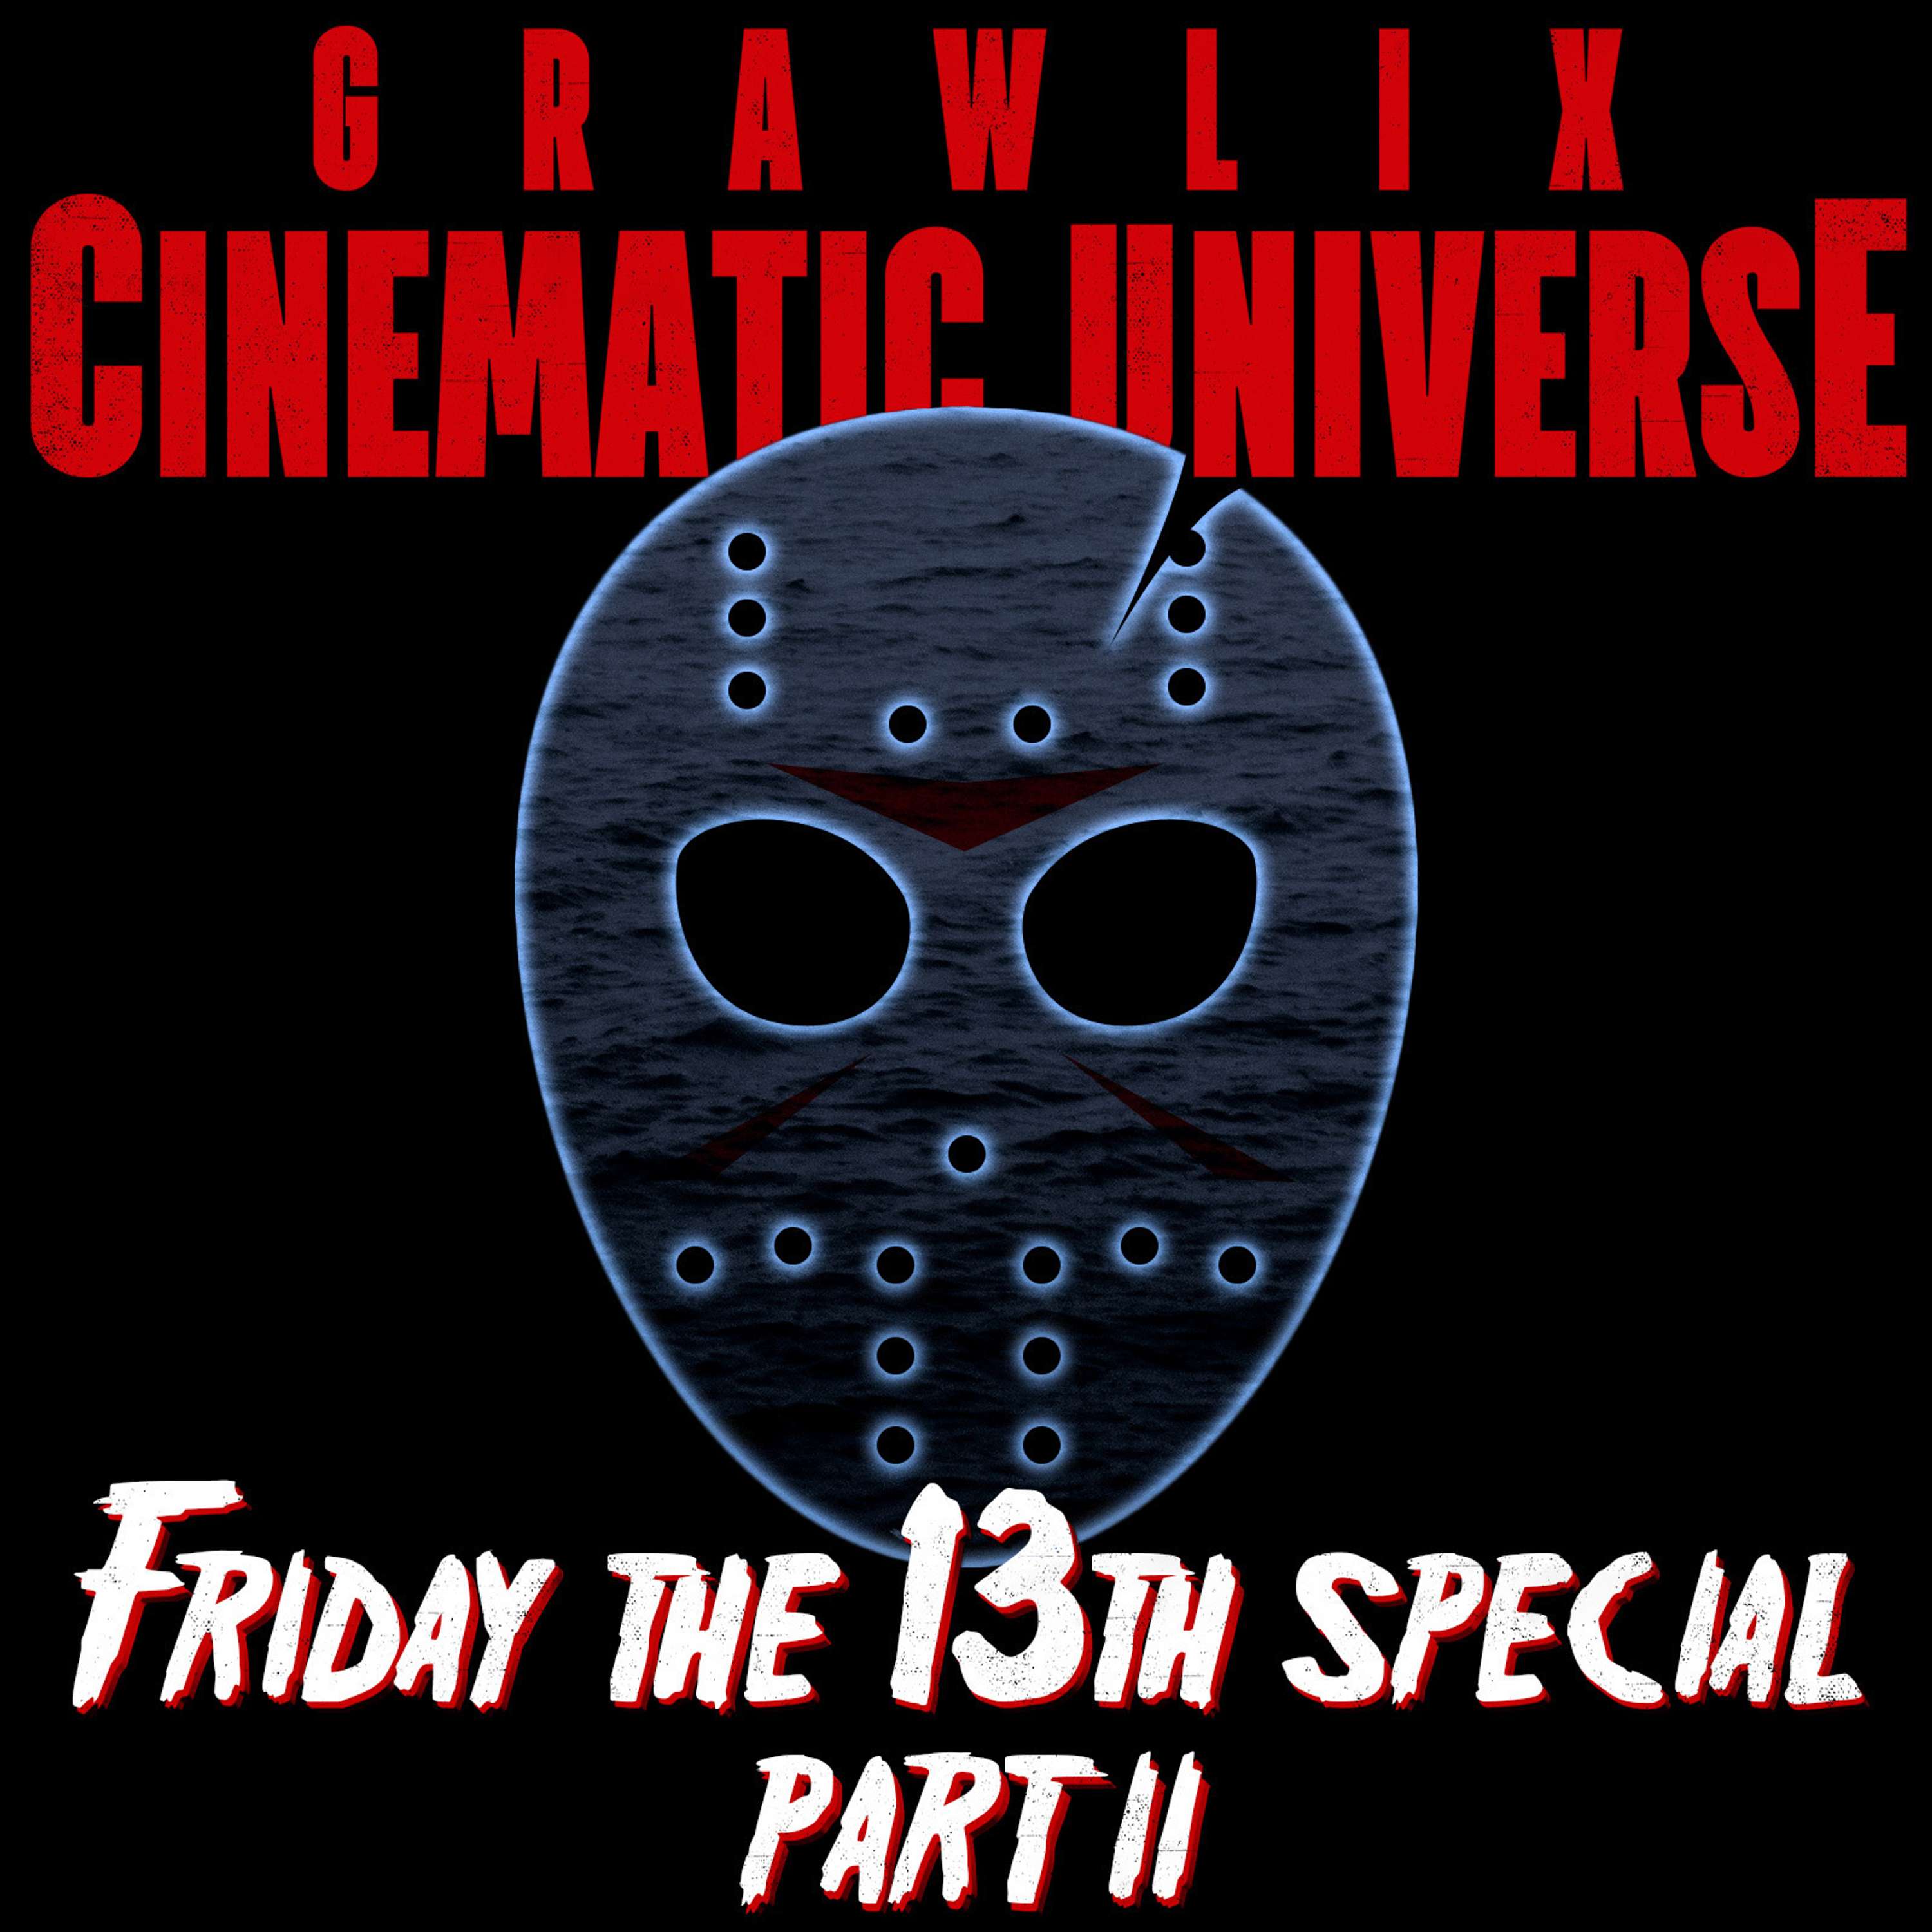 Friday the 13th Special Part II